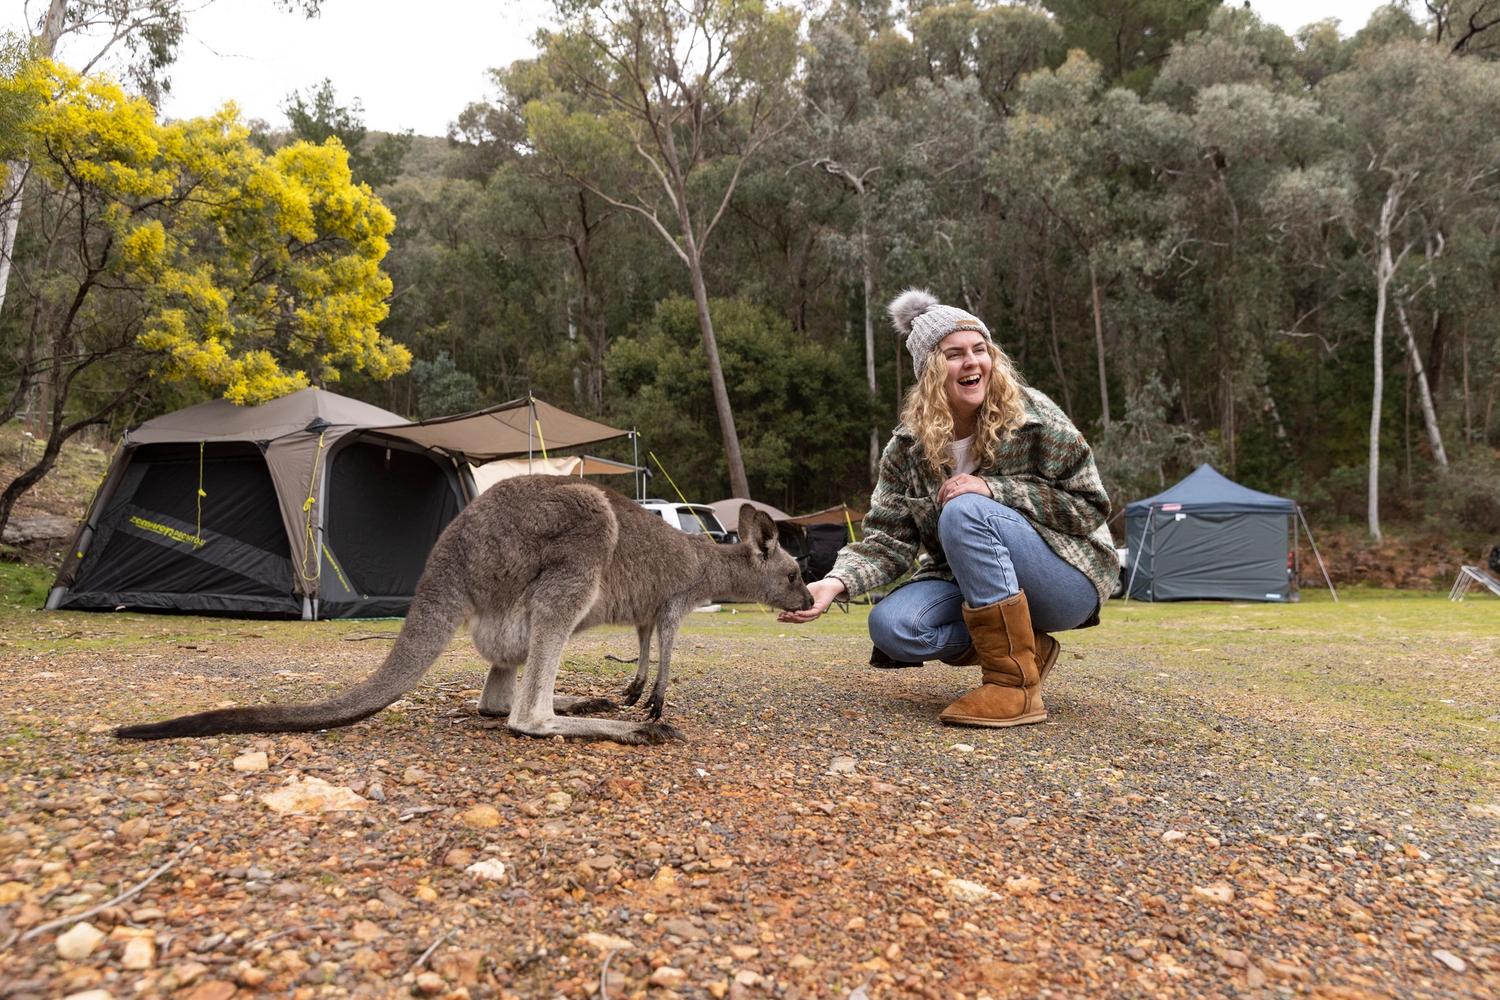 Wallaby feeding from the hand of woman in a NSW park